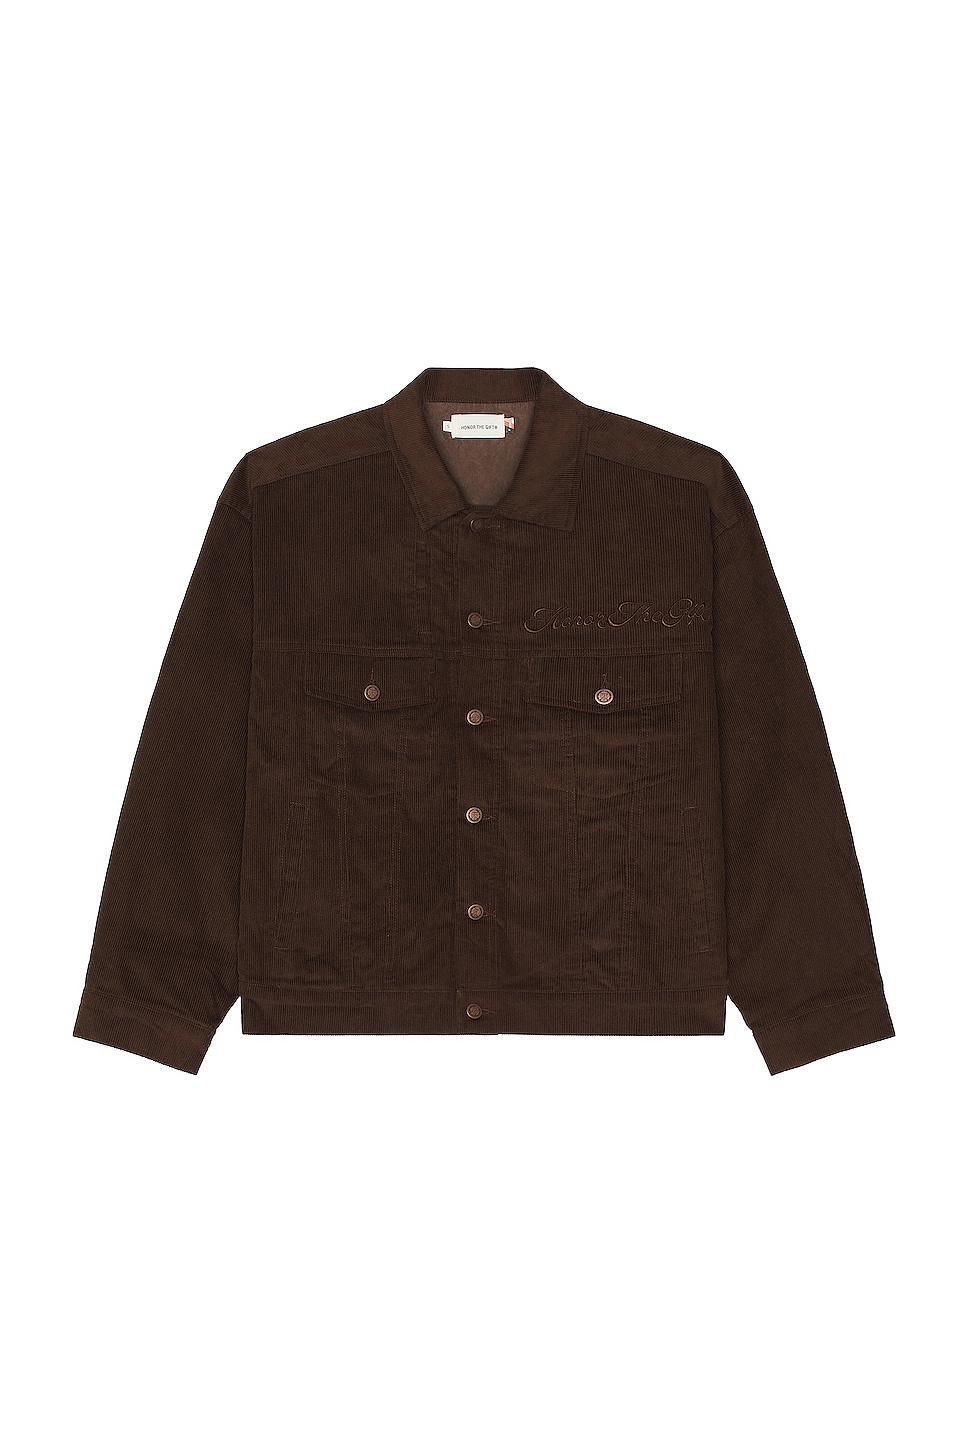 Image 1 of Honor The Gift Trucker Jacket in Brown